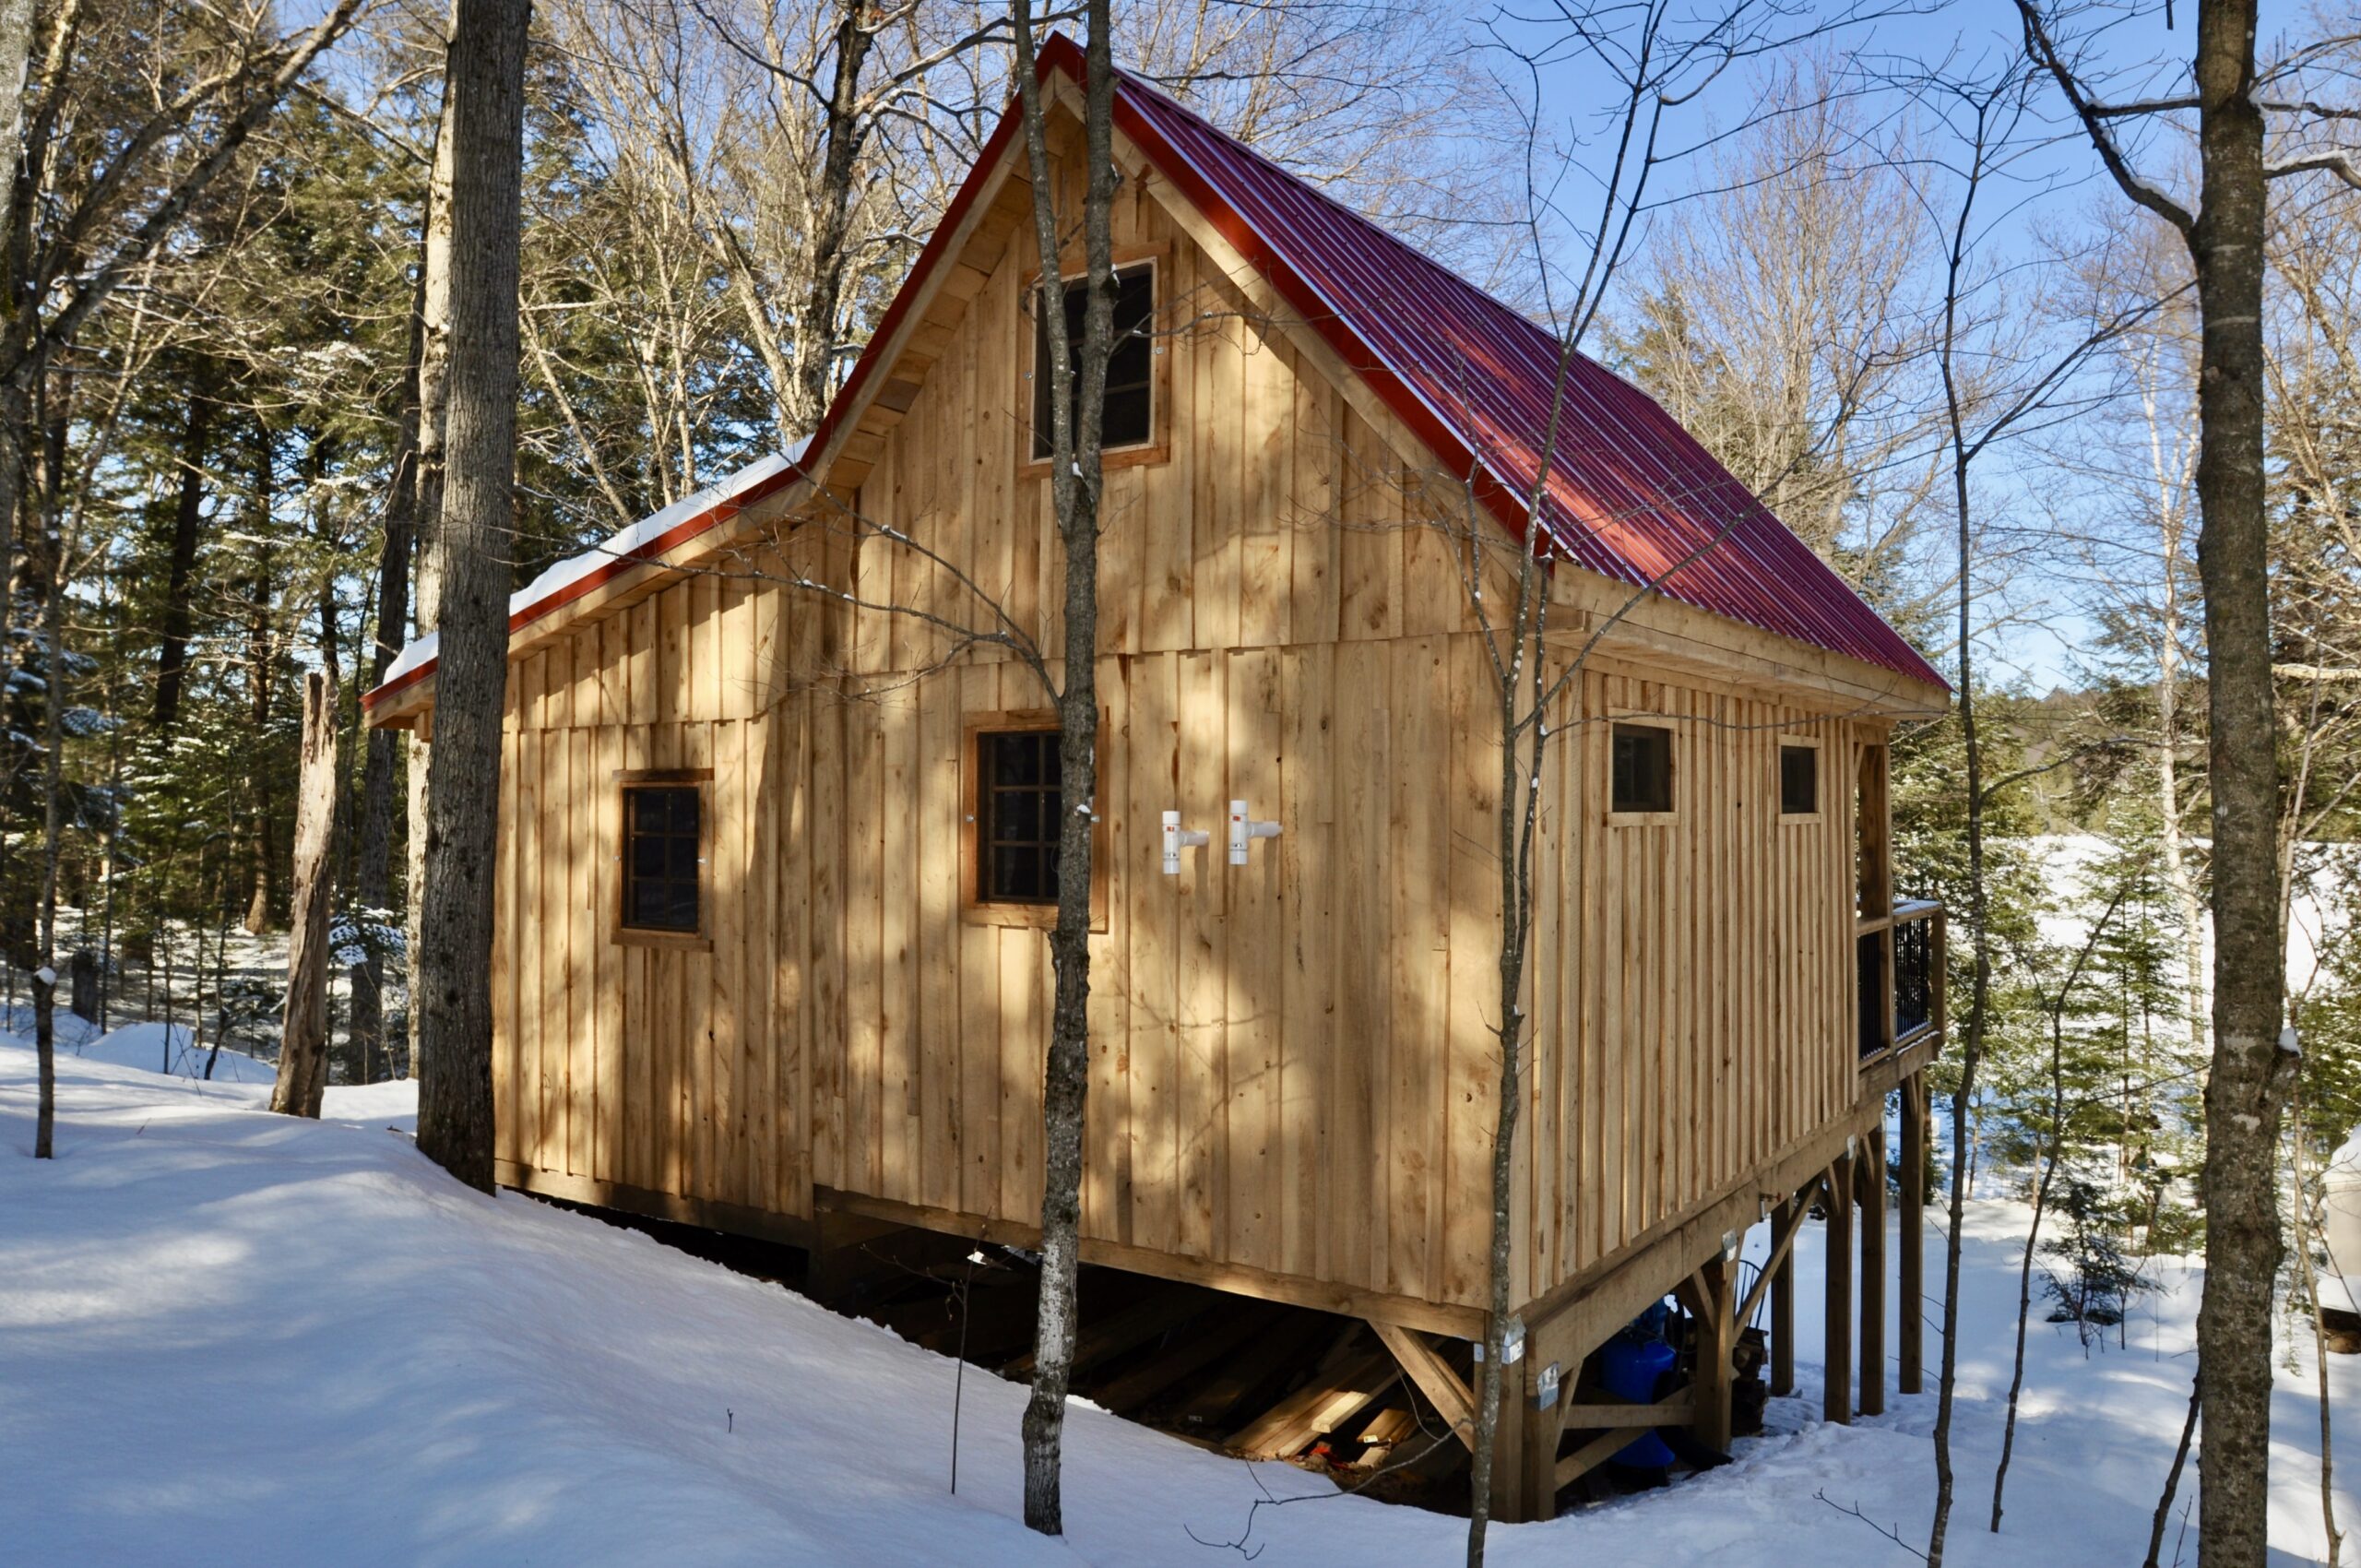 A one and a half story timber frame cabin with a red roof sits in a snowy wooded area.